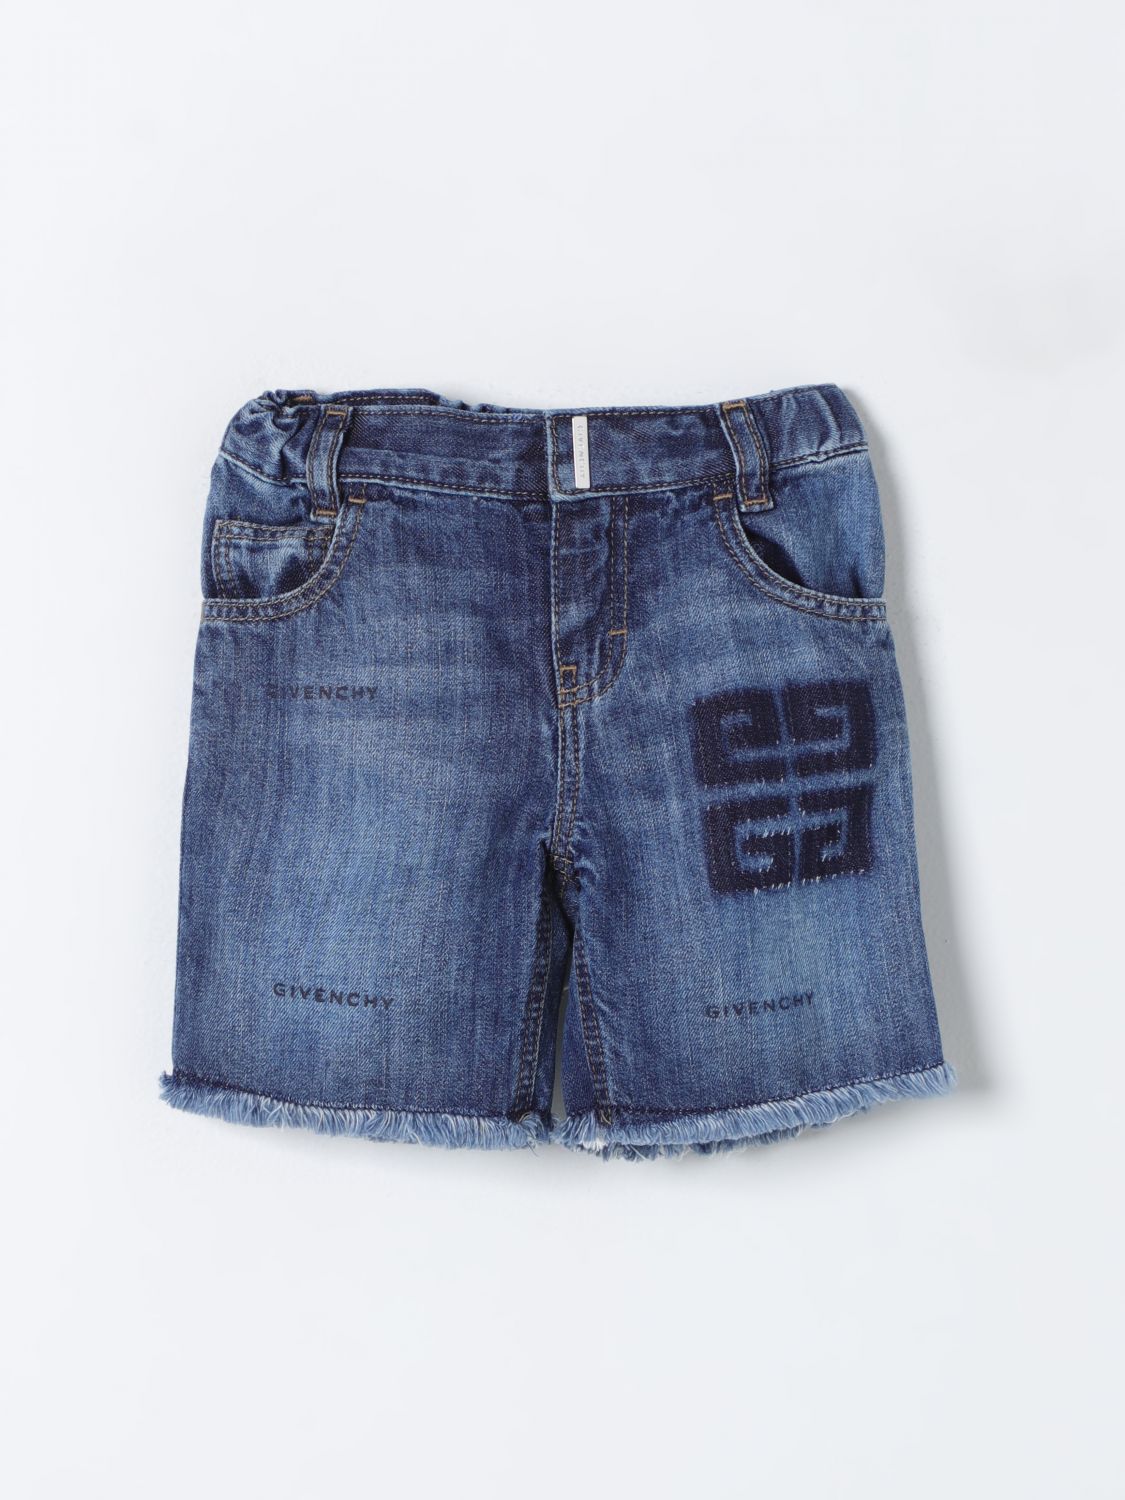 Givenchy Babies' Pants  Kids Color Grey In 灰色